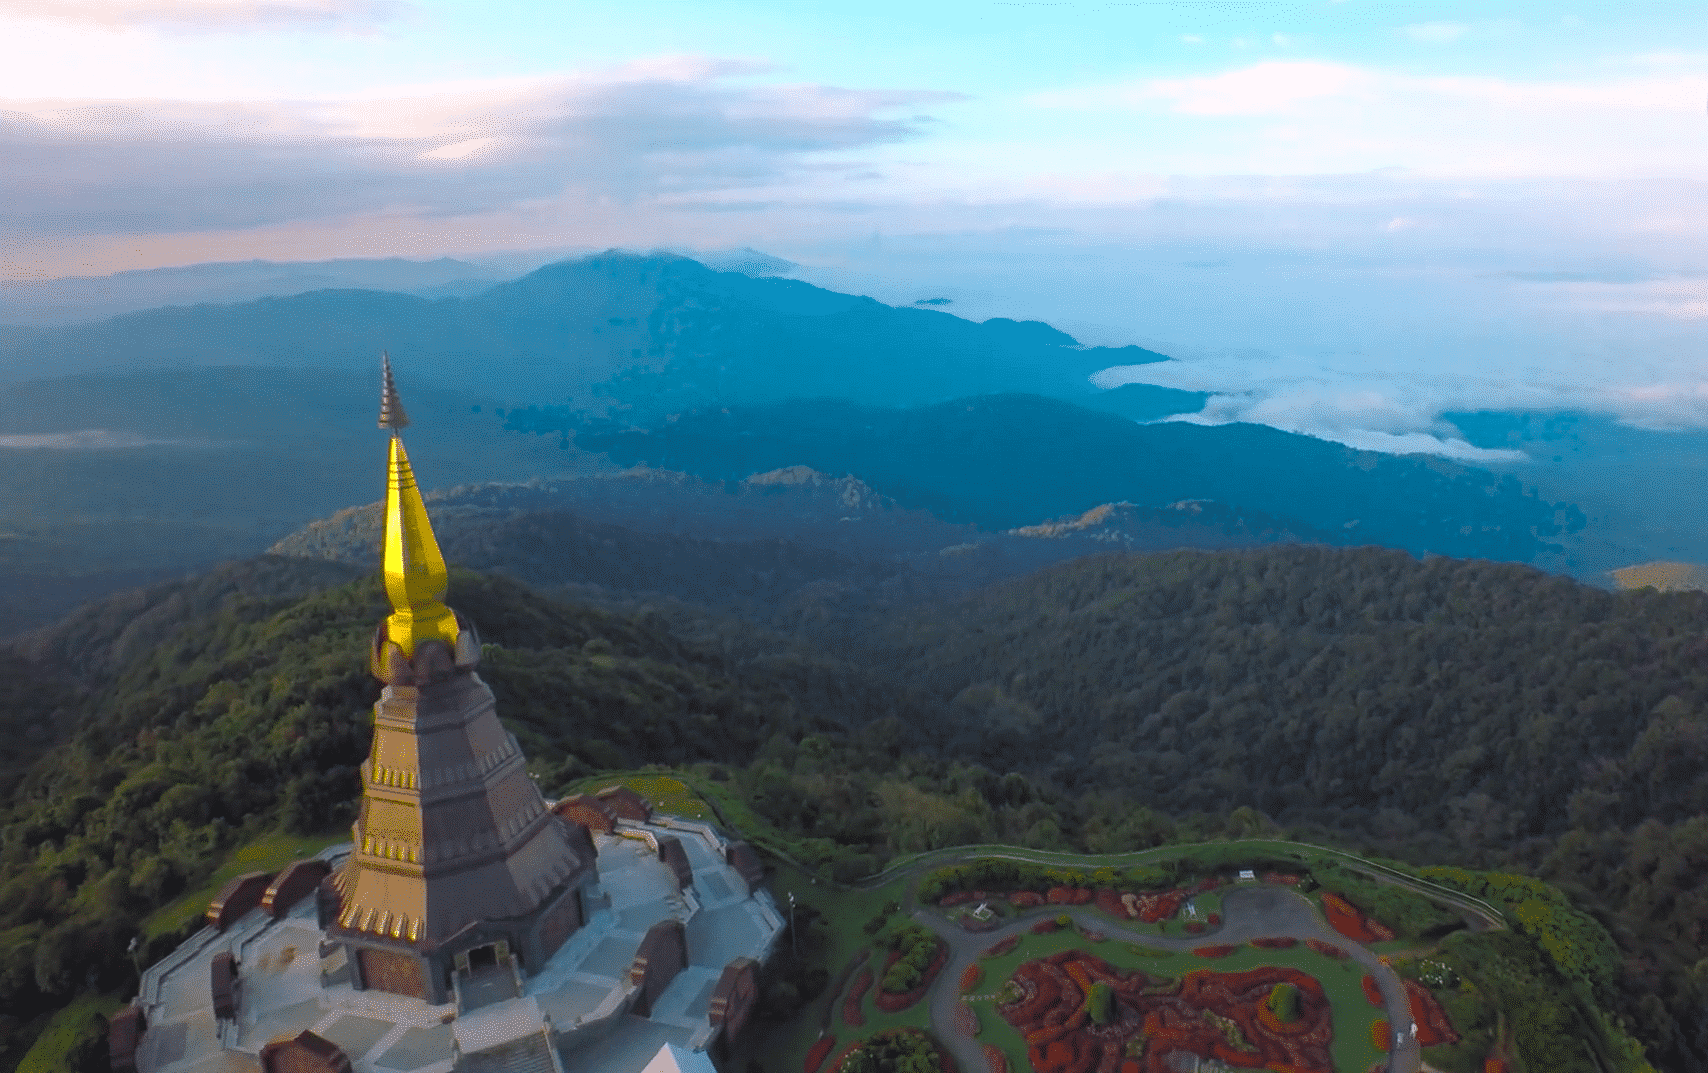 another view from the stupa